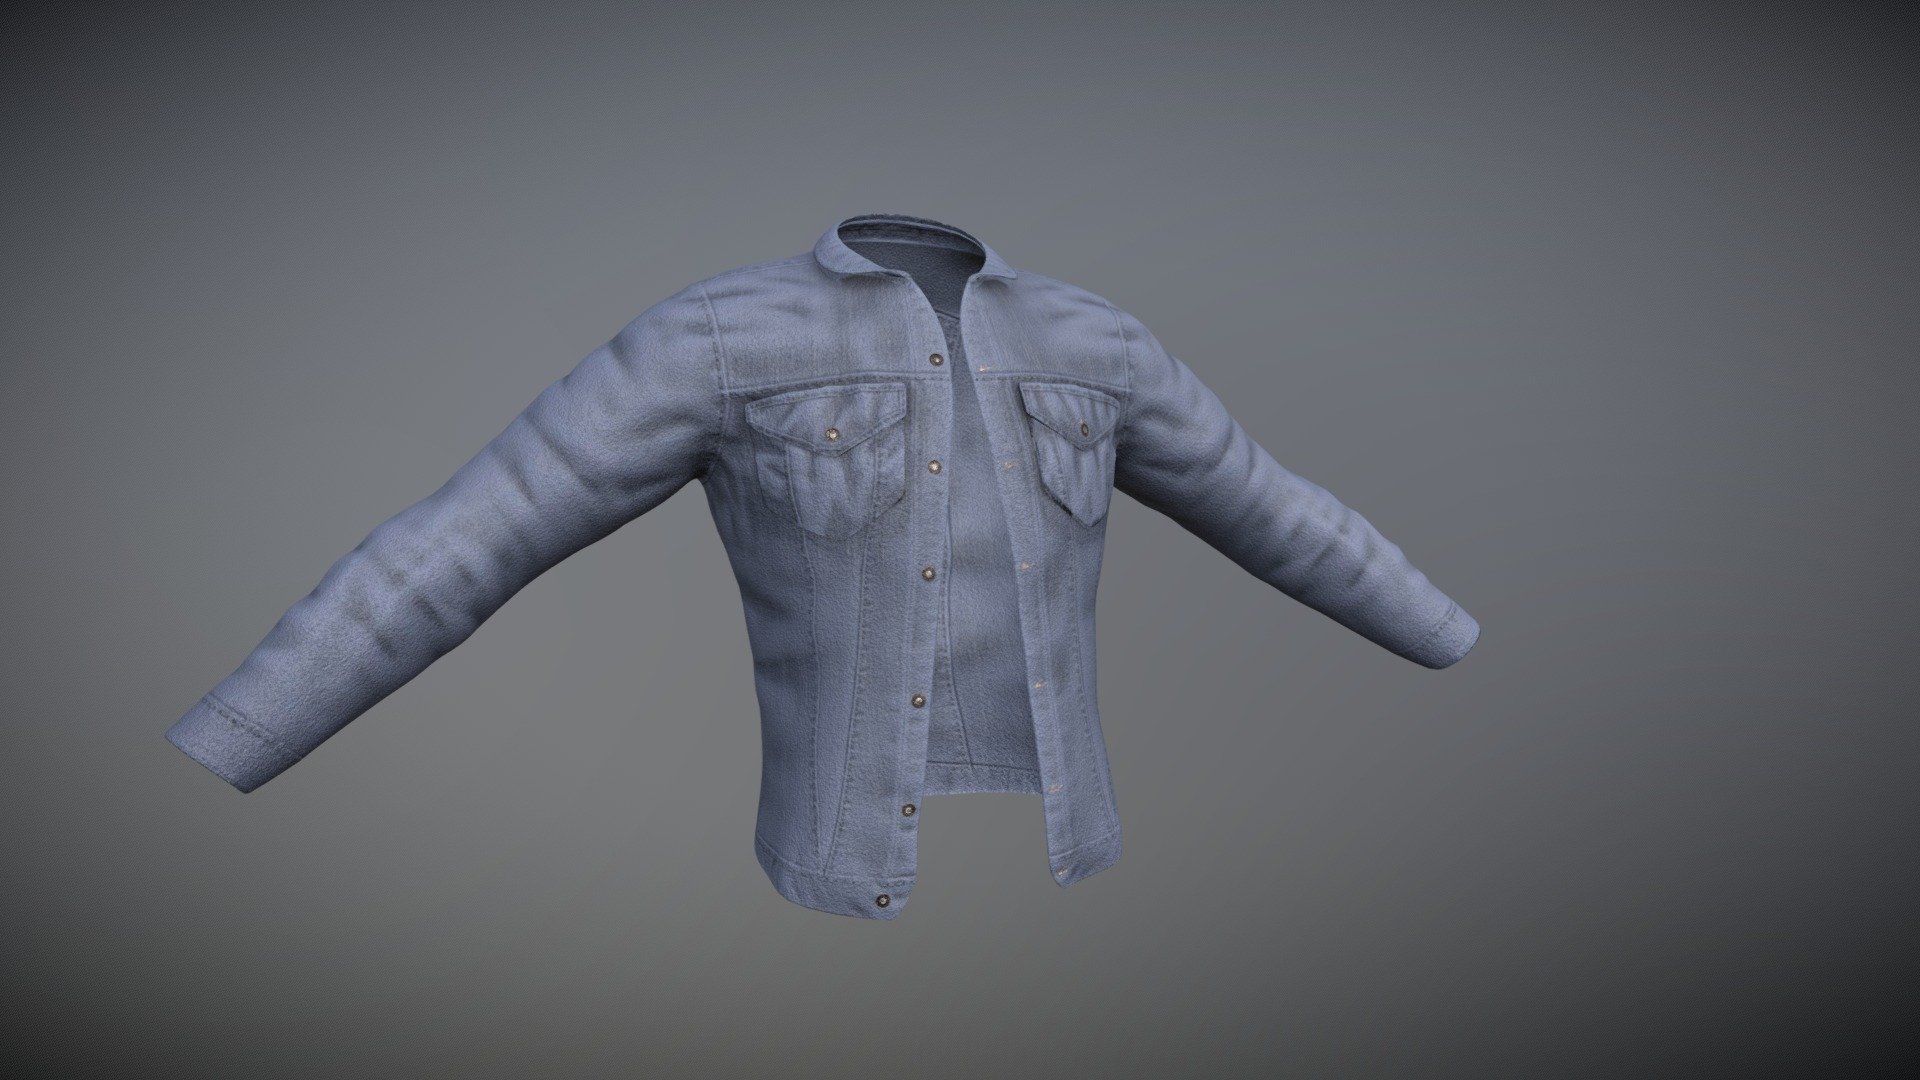 Modeled in maya, Scultped in Zbrush, Textured in Substance Painter - Jean Jacket Sculpt - 3D model by JerryTheCreator 3d model